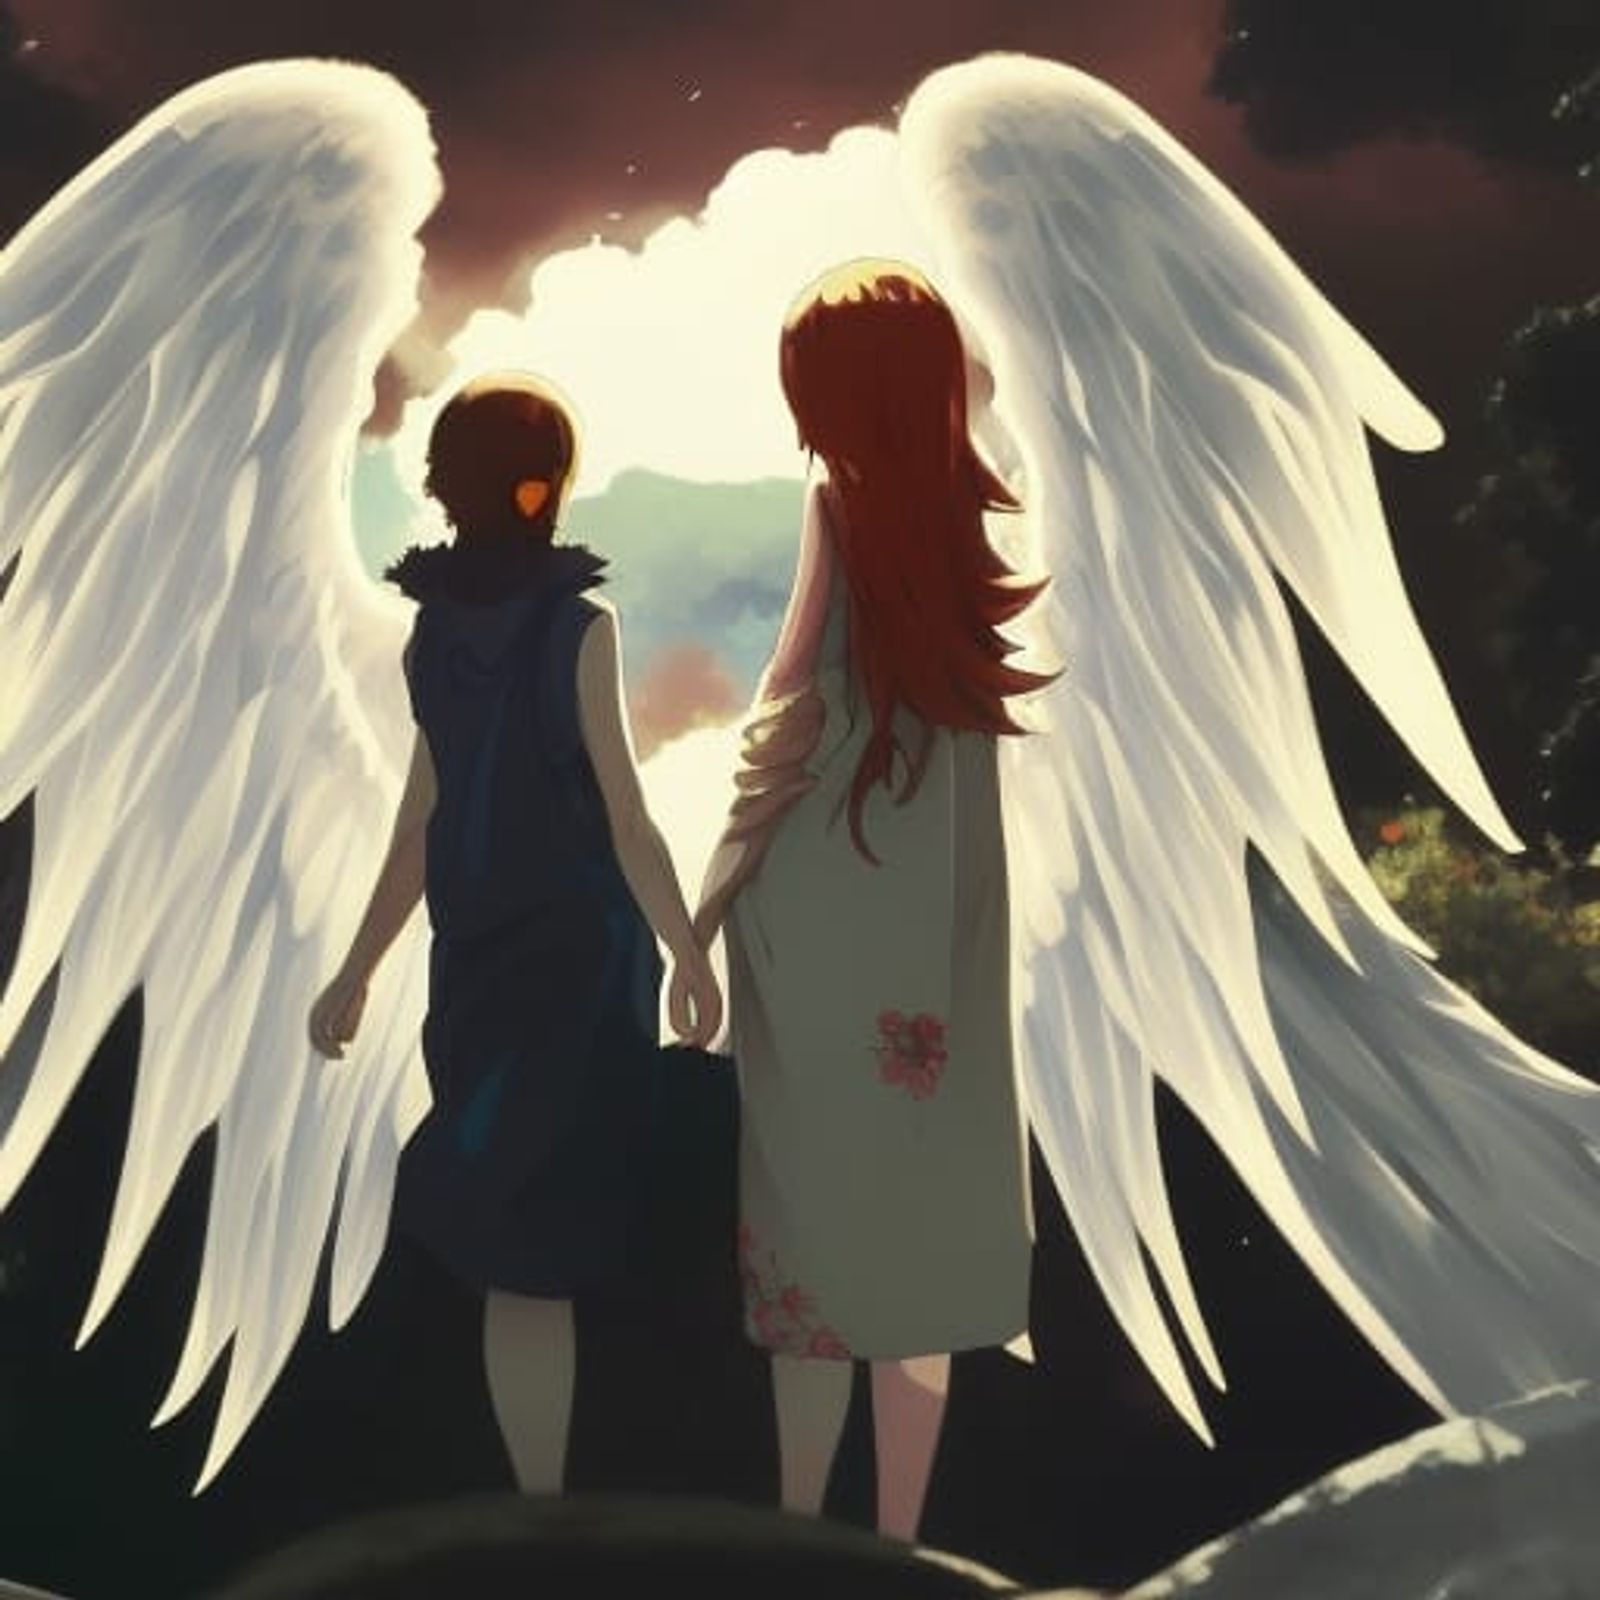 two angels in love anime